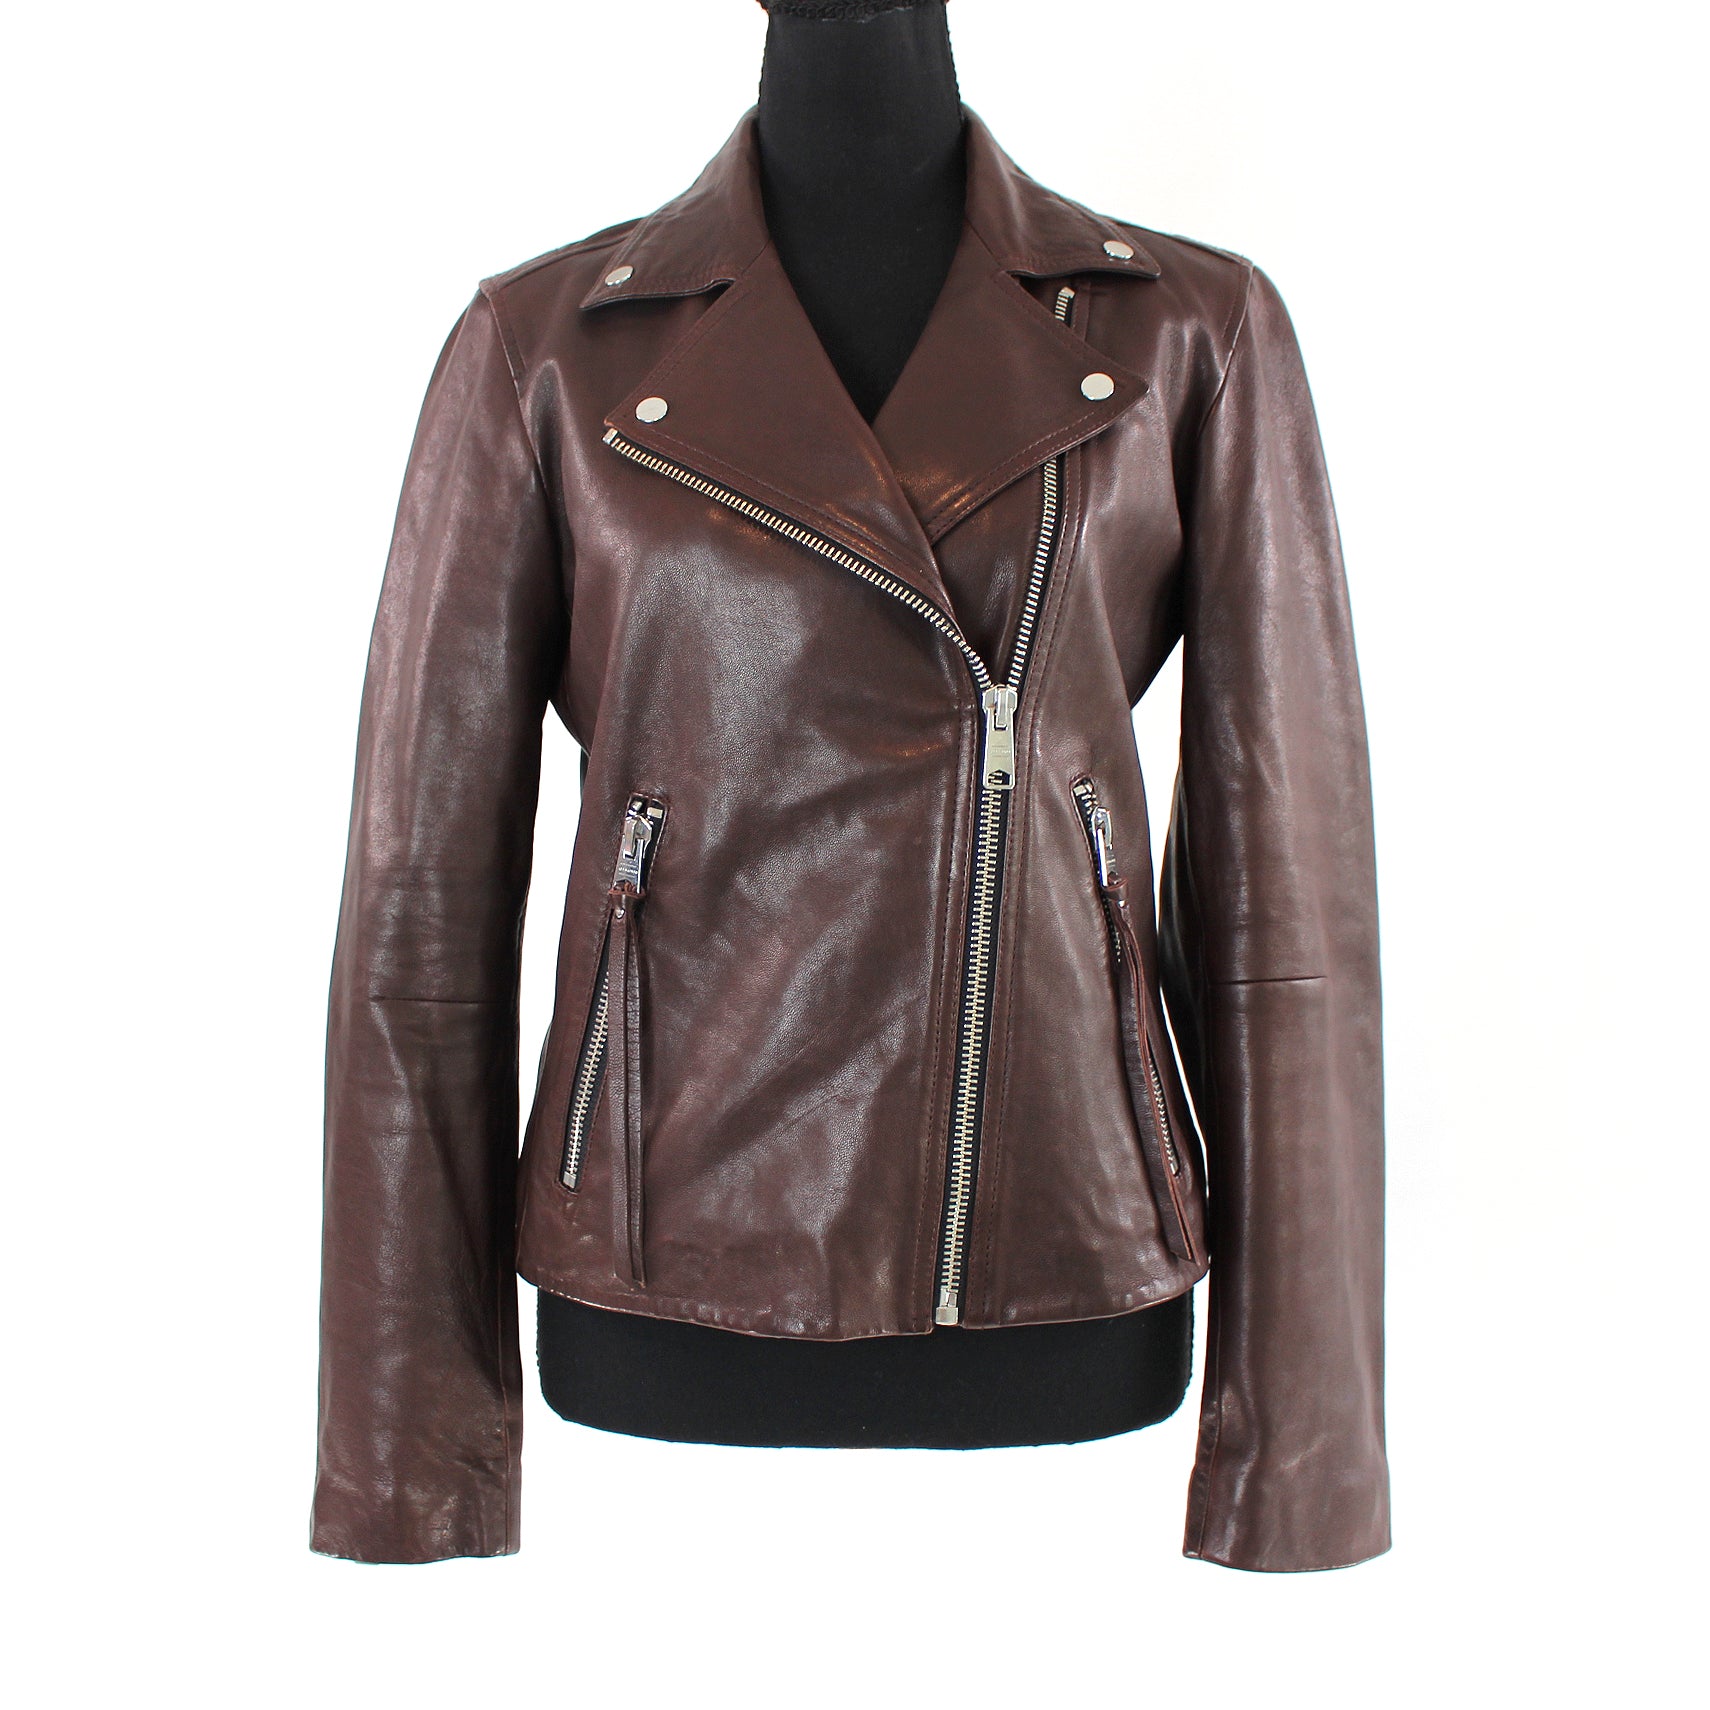 New Closet Leather All Dalby – Oxblood Jacket Saints Brown The Biker York Zip-Up